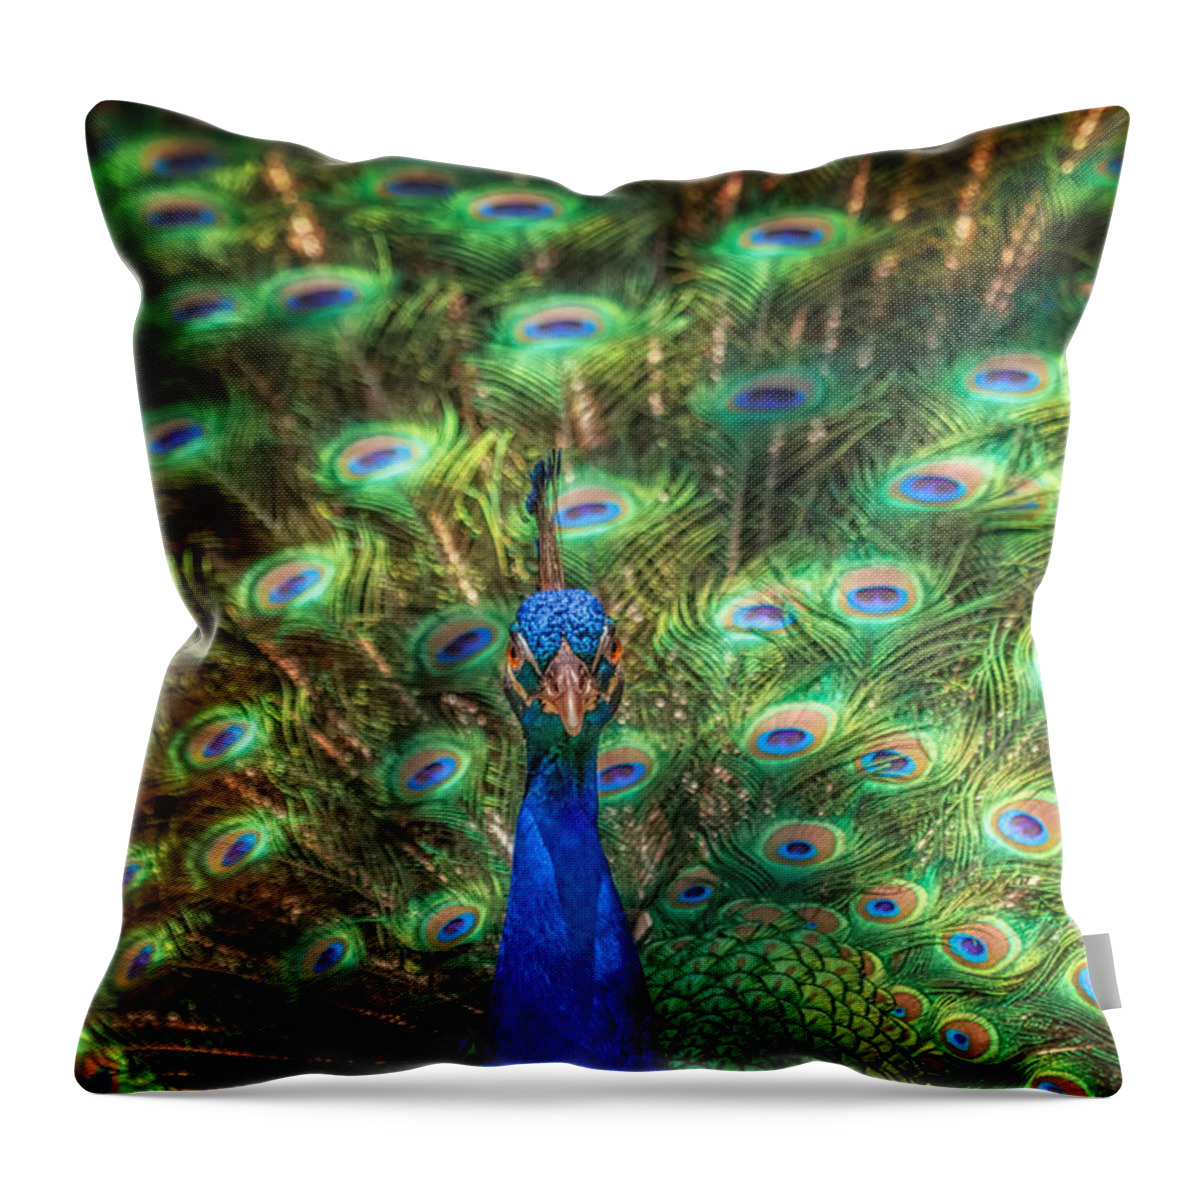 Critter Throw Pillow featuring the photograph Hypnotic Eyes by Sylvia J Zarco